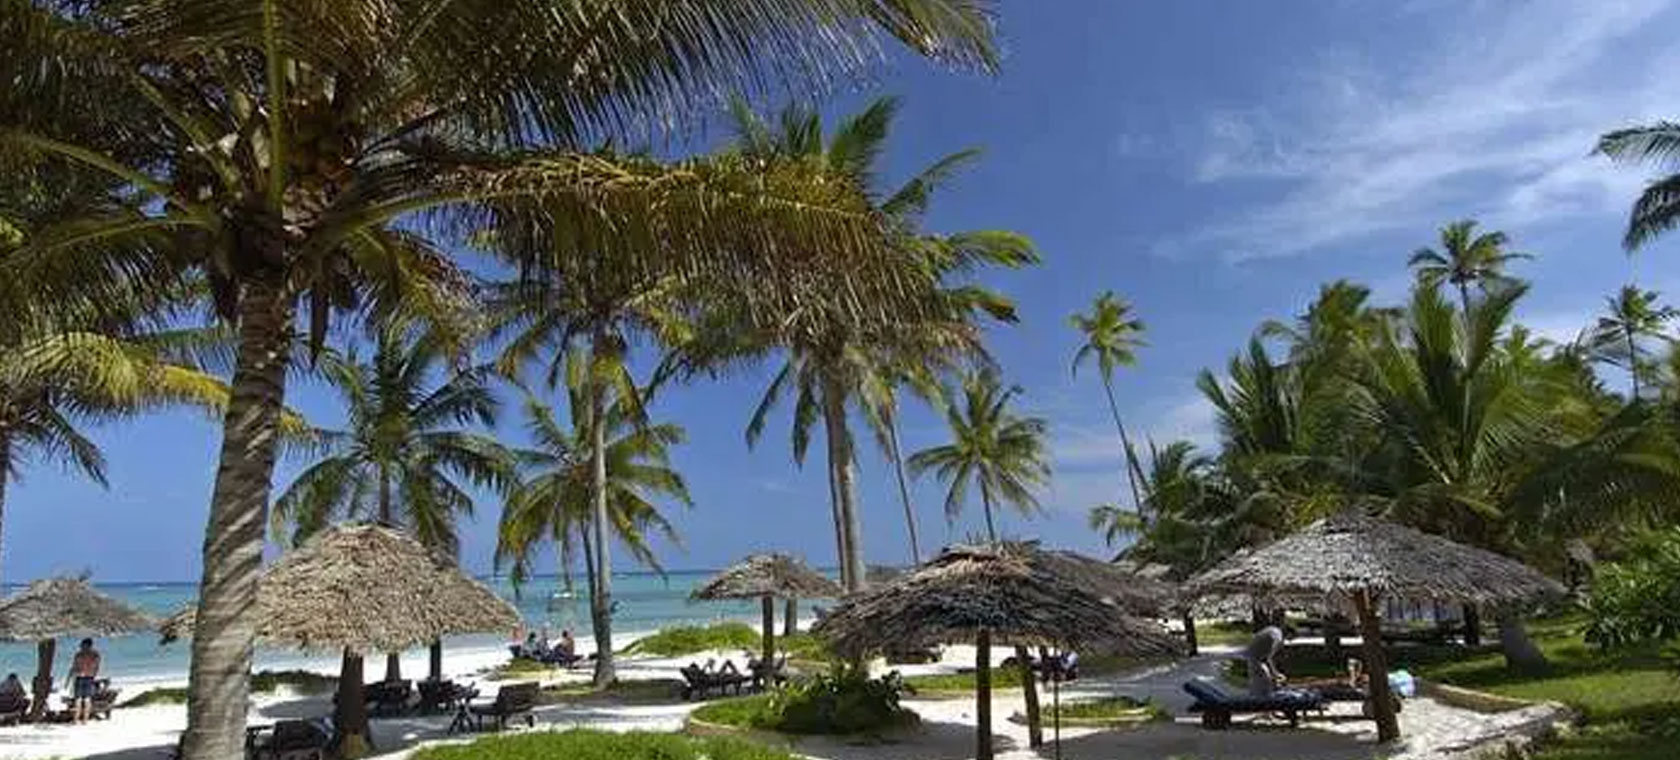 Zanzibar: An affordable destination for a holiday in the Indian Ocean - inews.co.uk